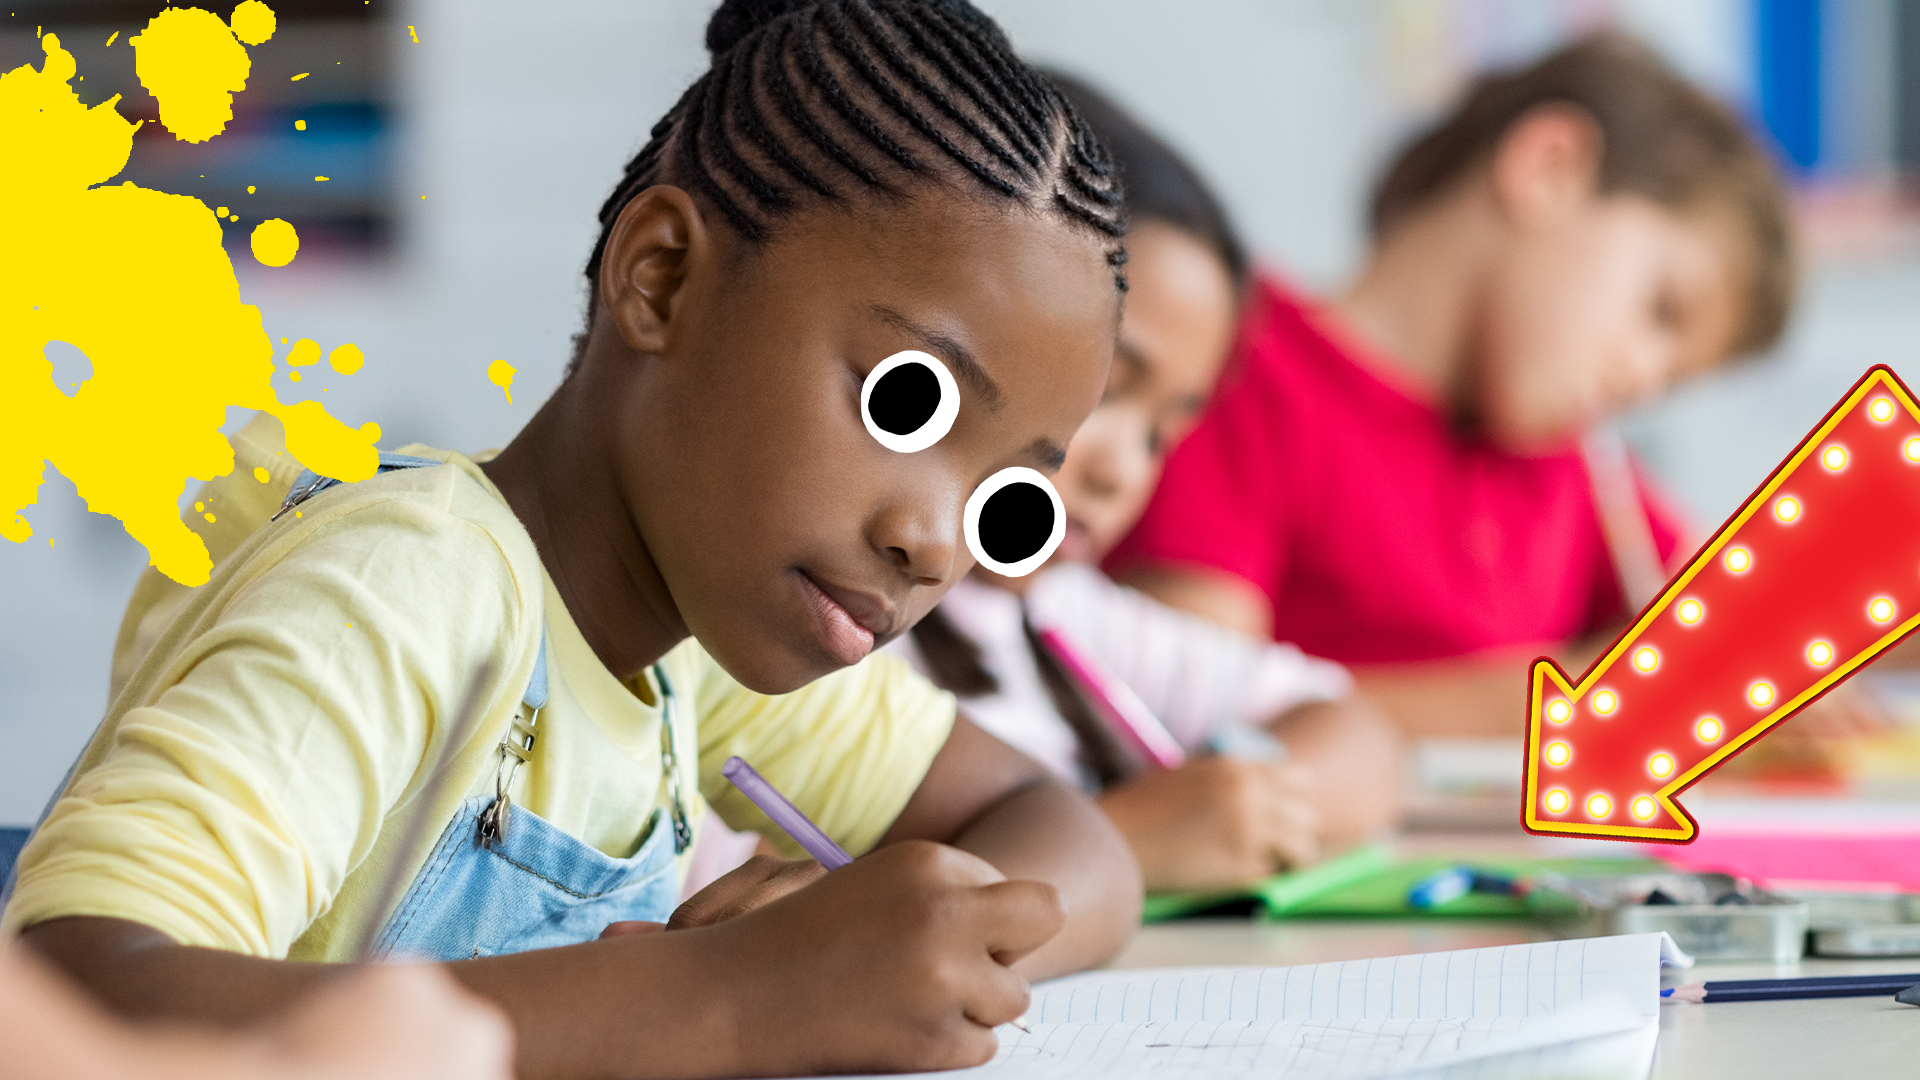 Girl writing in class with arrow and yellow splat 